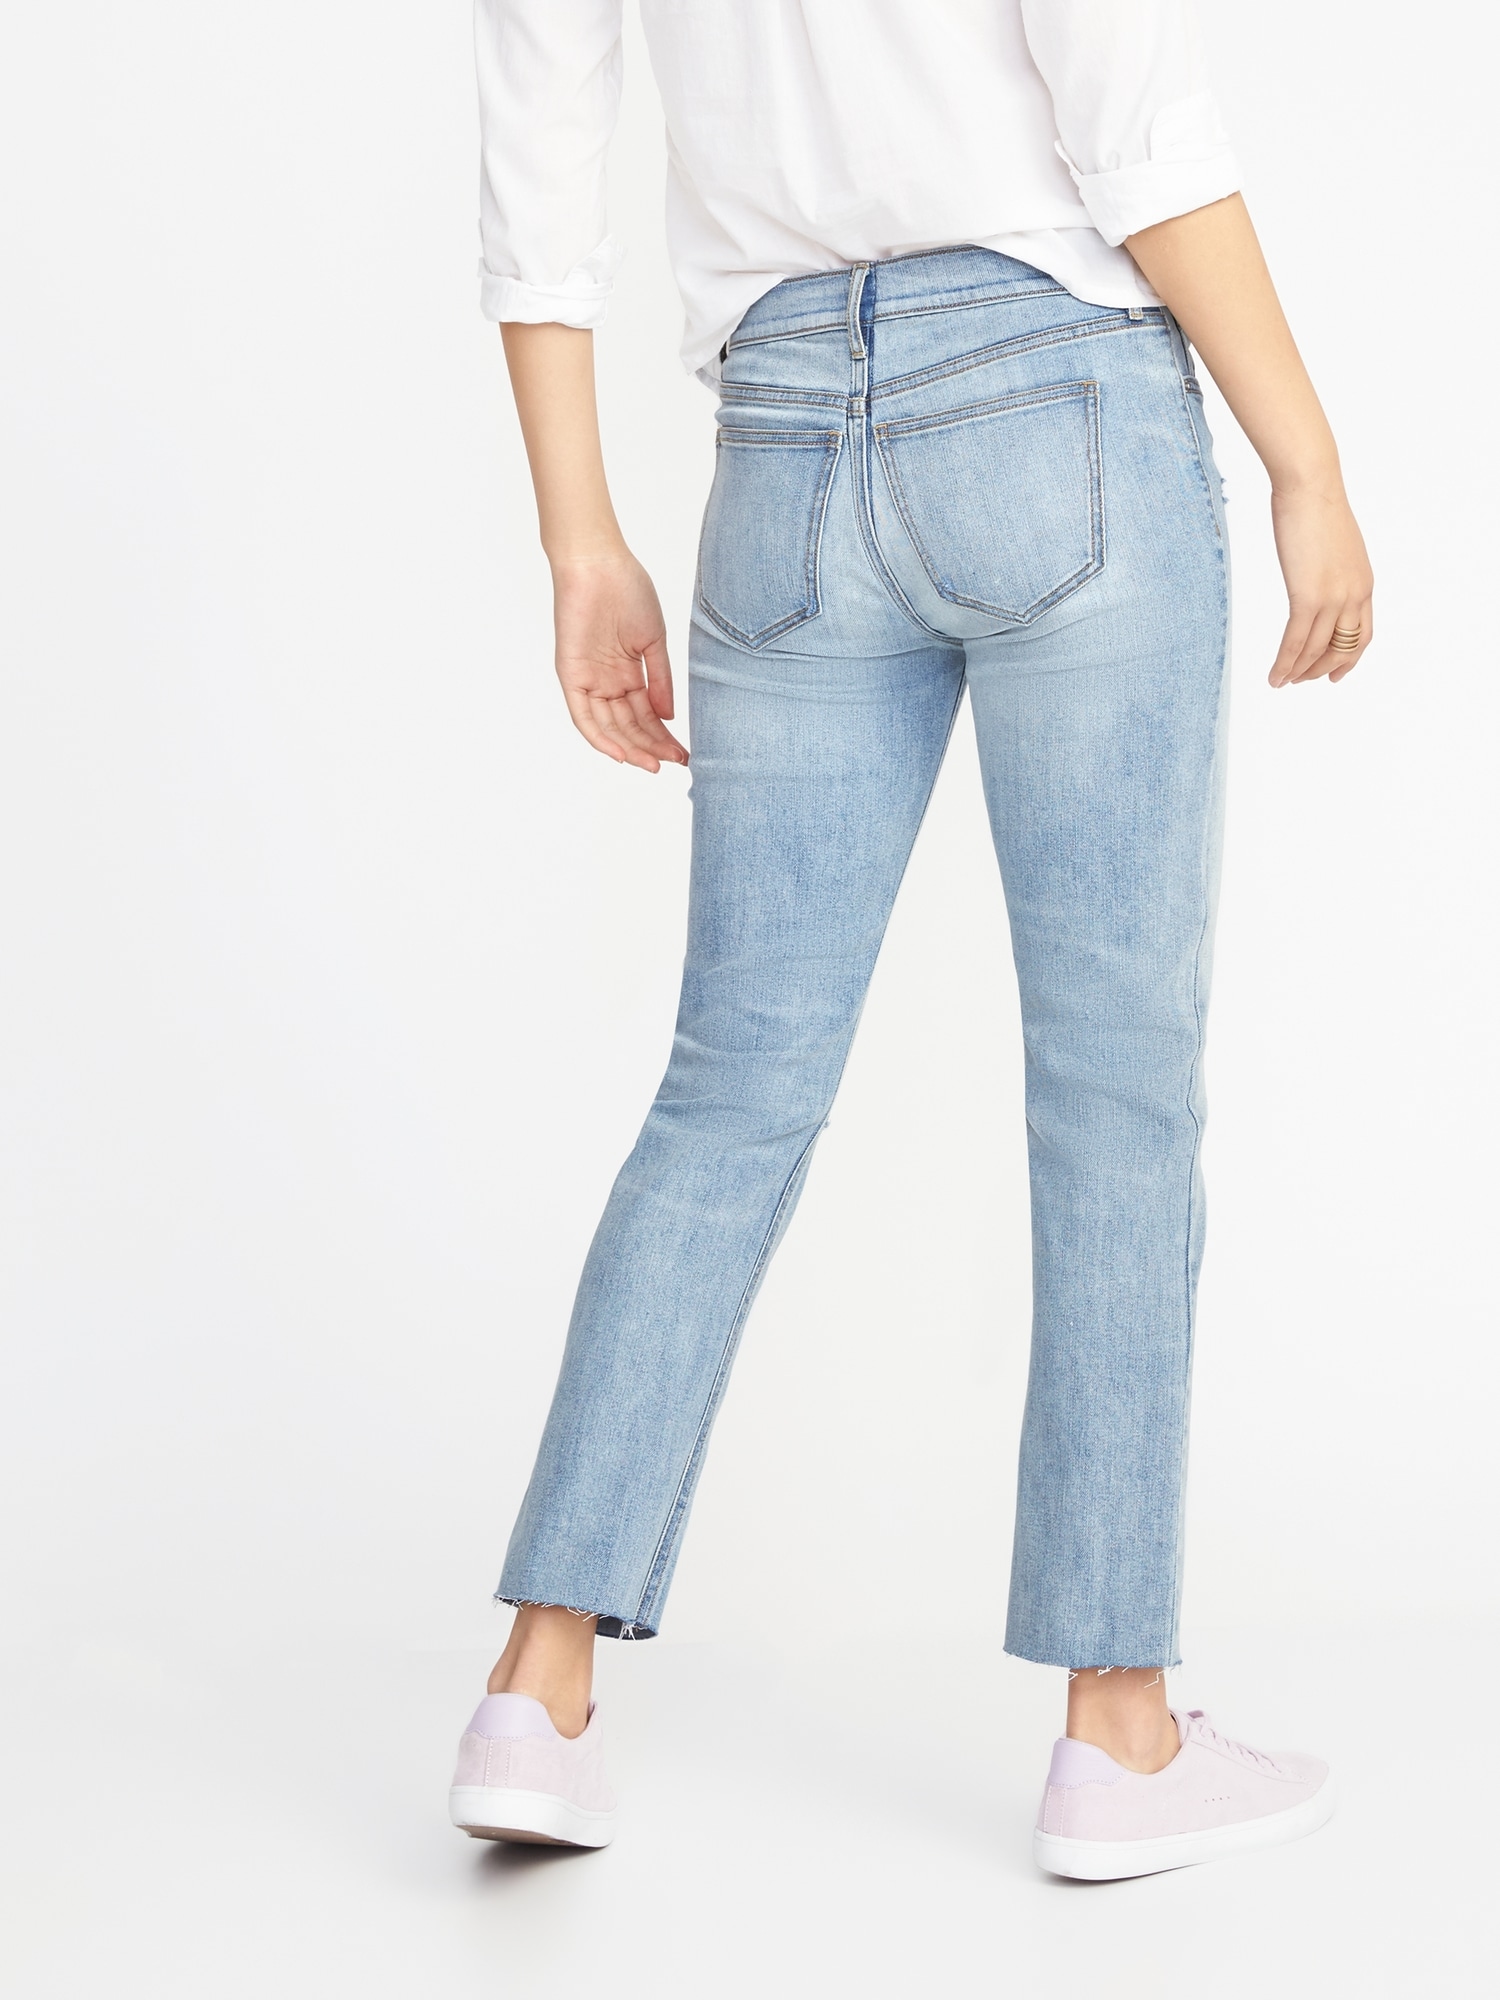 the power jean old navy